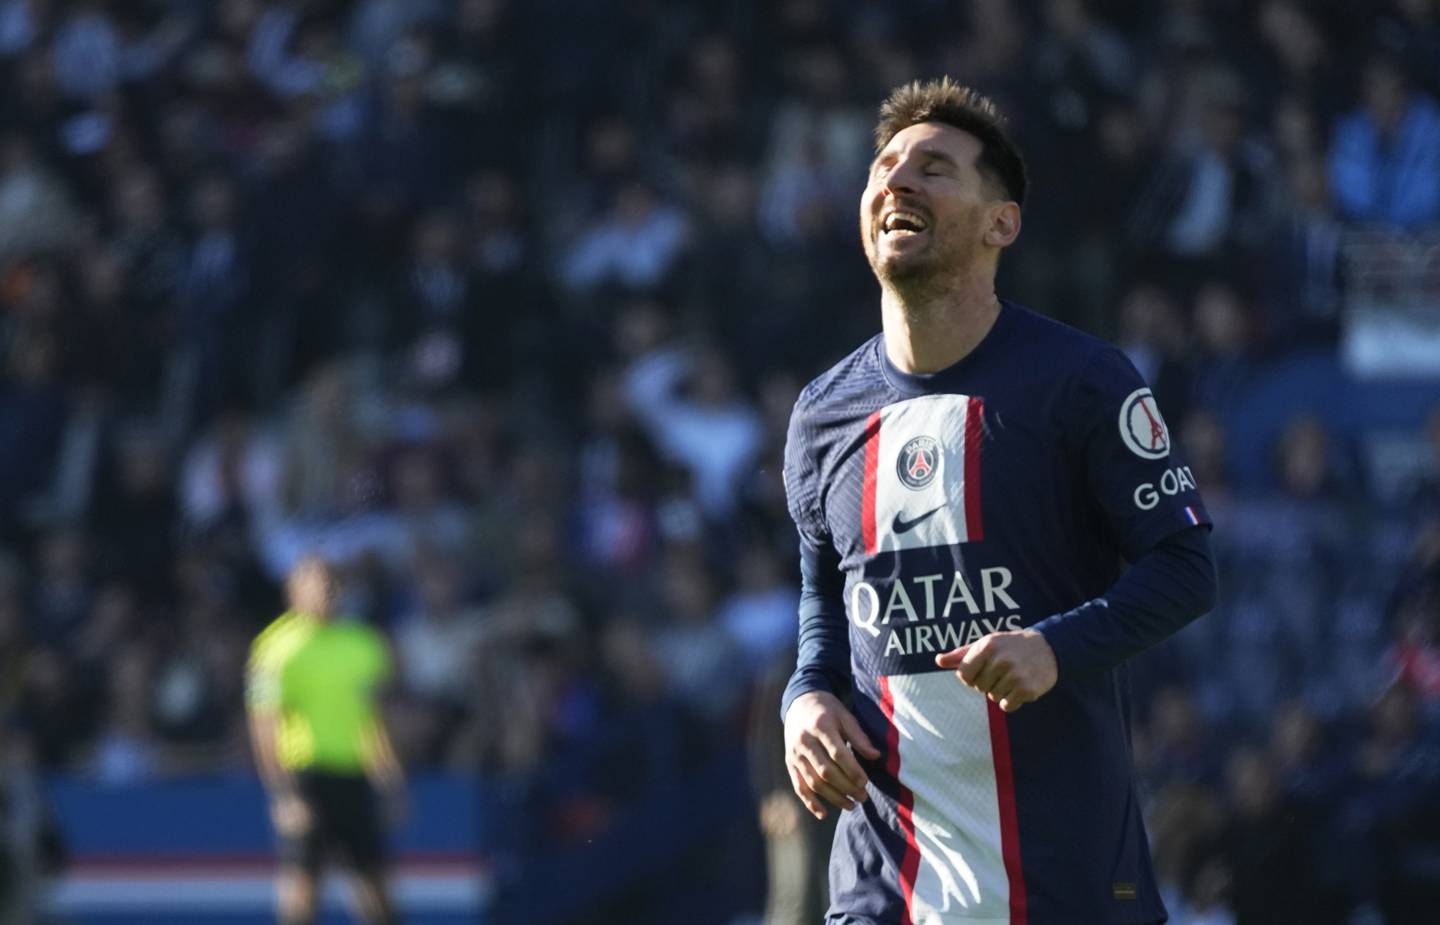 Lionel Messi reacts after missing a scoring chance during the French League One match on Nov. 13, 2022.